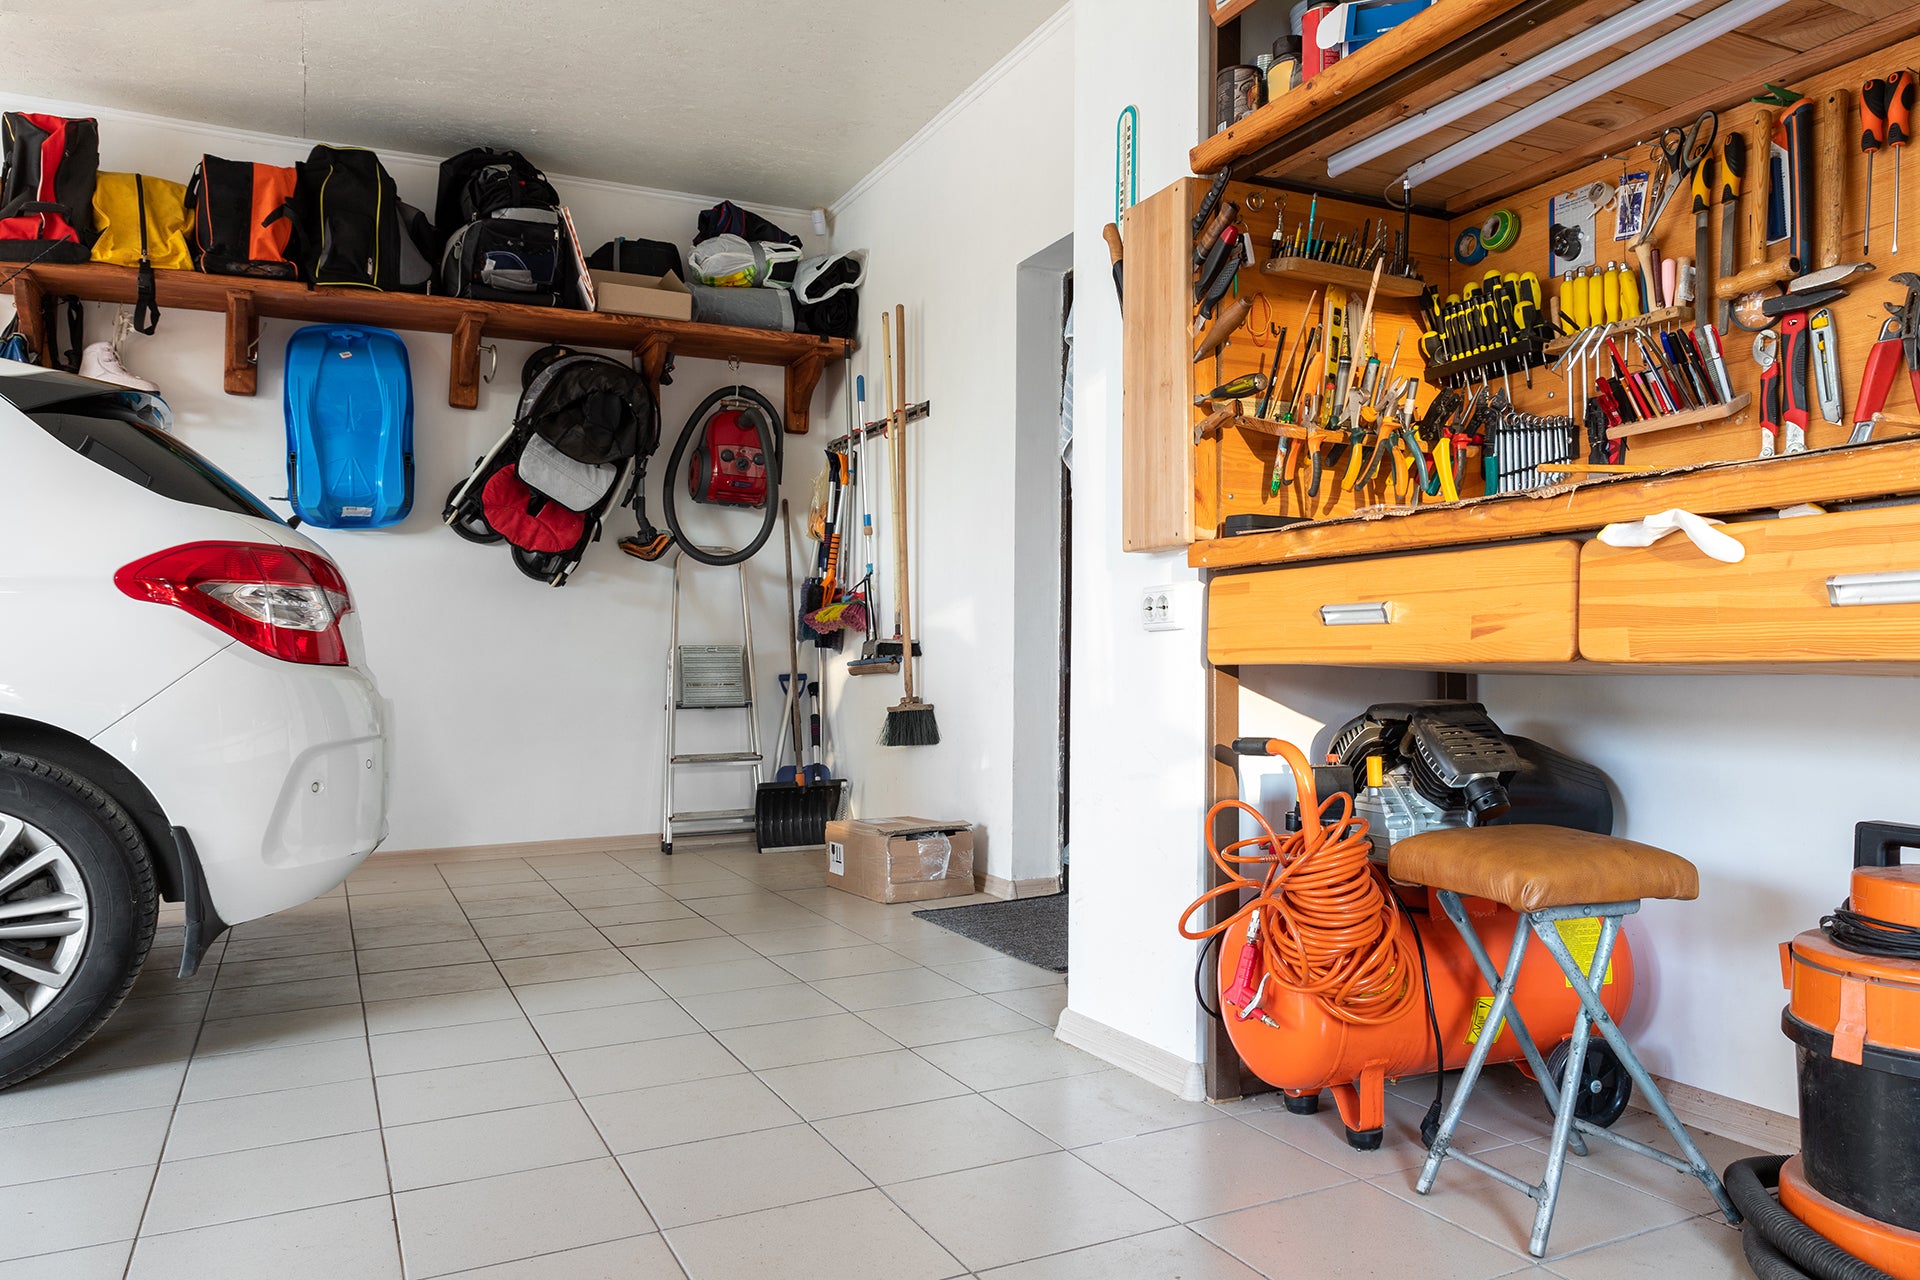 How to Choose the Right Workbench LED Light For Your Garage Part II